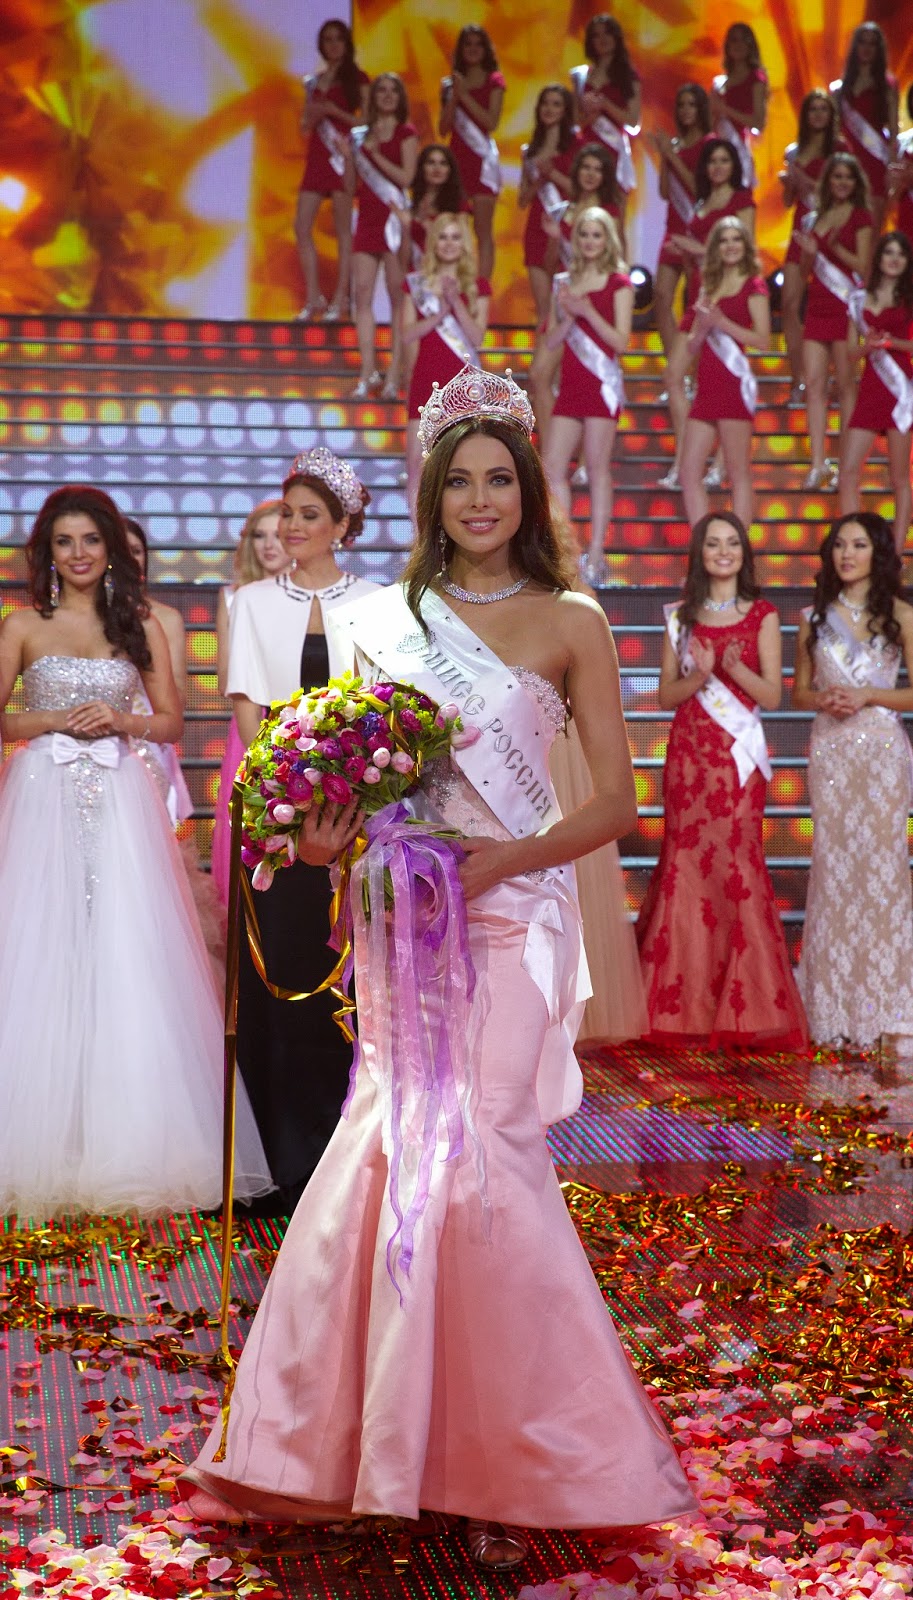 https://4.bp.blogspot.com/-TUQUE2w1Eb4/UxYX2bJLpGI/AAAAAAAAGbA/4Wfs3Gz4_8k/s1600/Newly+crowned+Miss+Russia+2014+Yulia+Alipova+smiles+after+receiving+her+title+at+the+Miss+Russia+2014+beauty+contest+in+Moscow+early+on+March+2%252C+2014.++23-year-old+Yulia+Alipova%252C+from+of+the+town+of+Balakov+%25283%2529.jpg